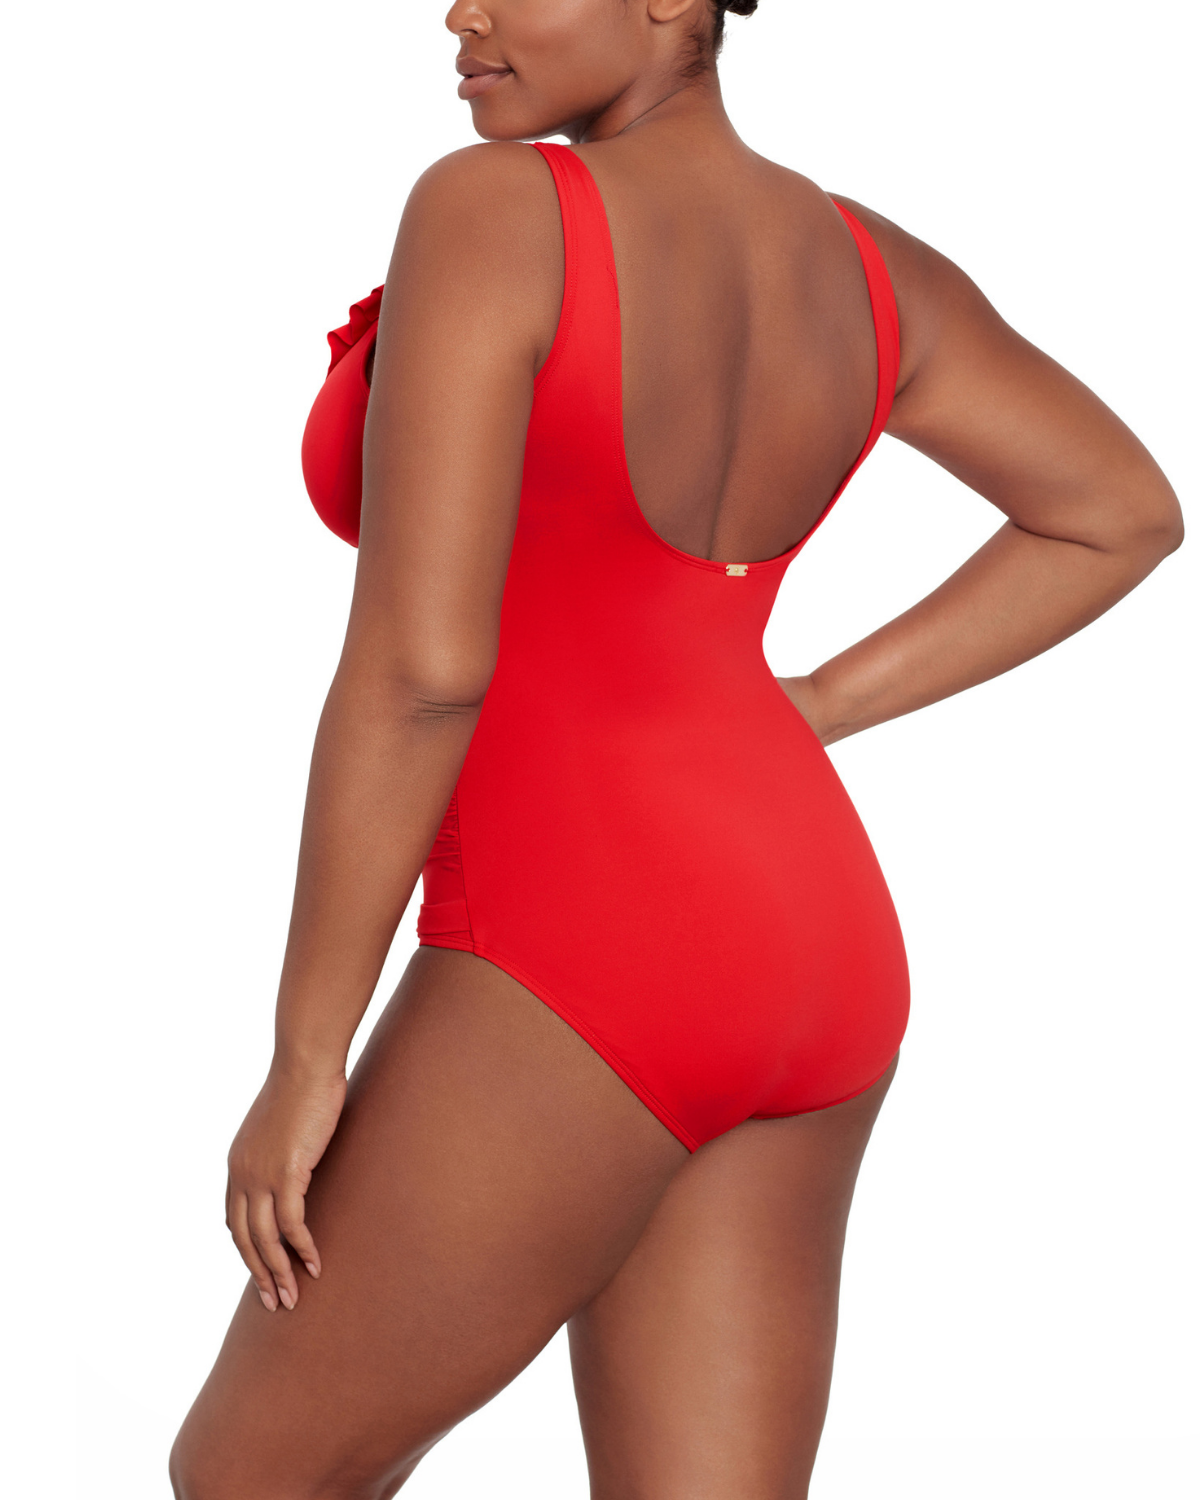 Model wearing a v-neck one piece with a ruffle trim and shirred panel around the torso in red